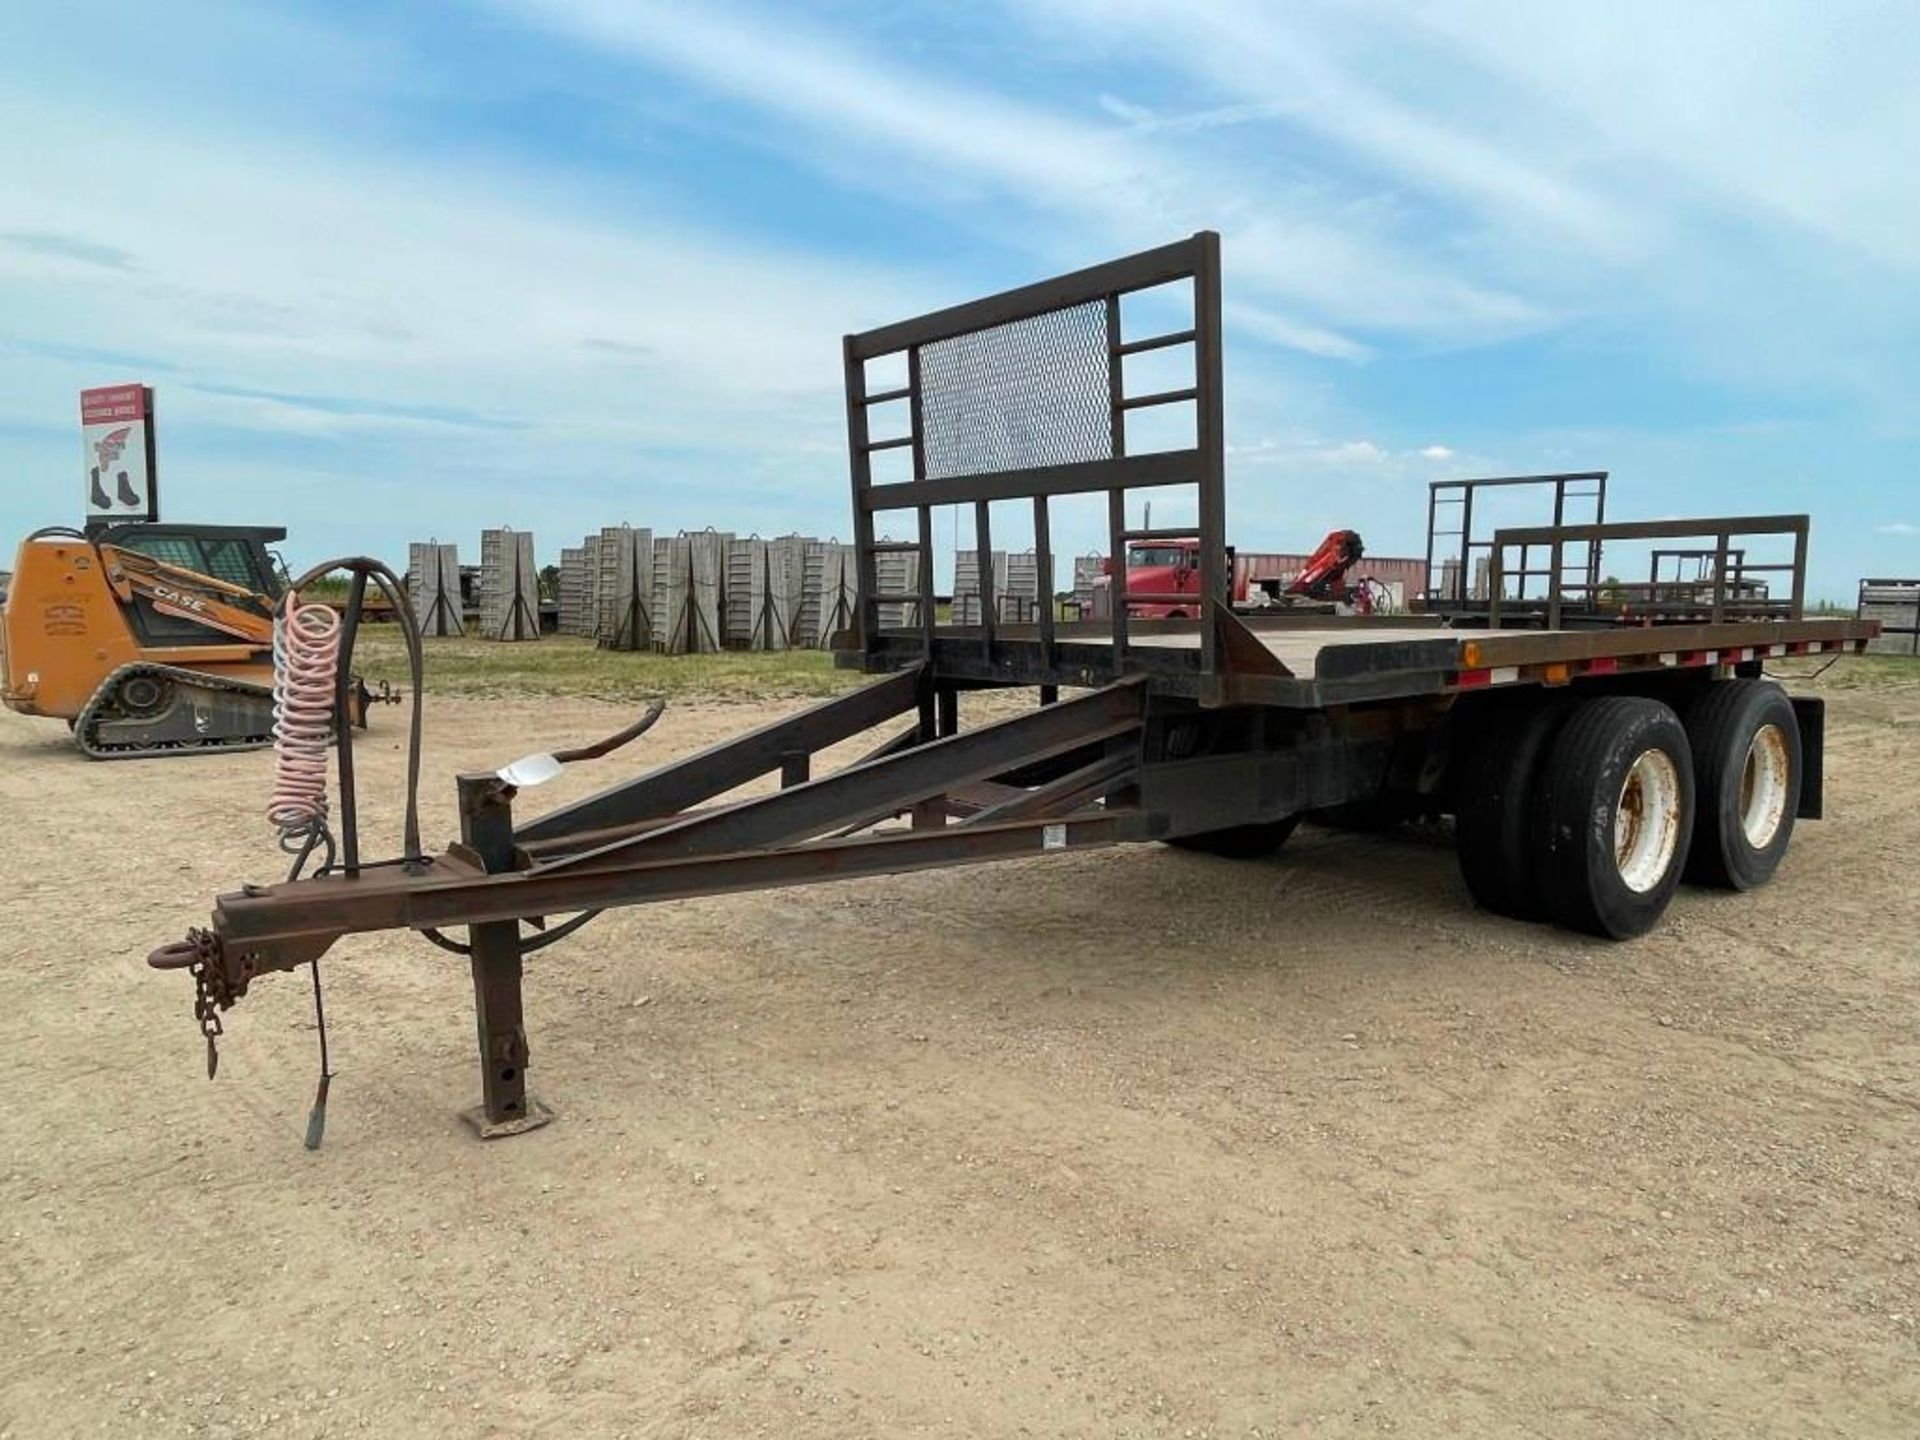 (1) 1998 16' x 8' 6" Concrete Form Trailer, VIN #DPSMN972555, Serial #2804101. Located in Lake Cryst